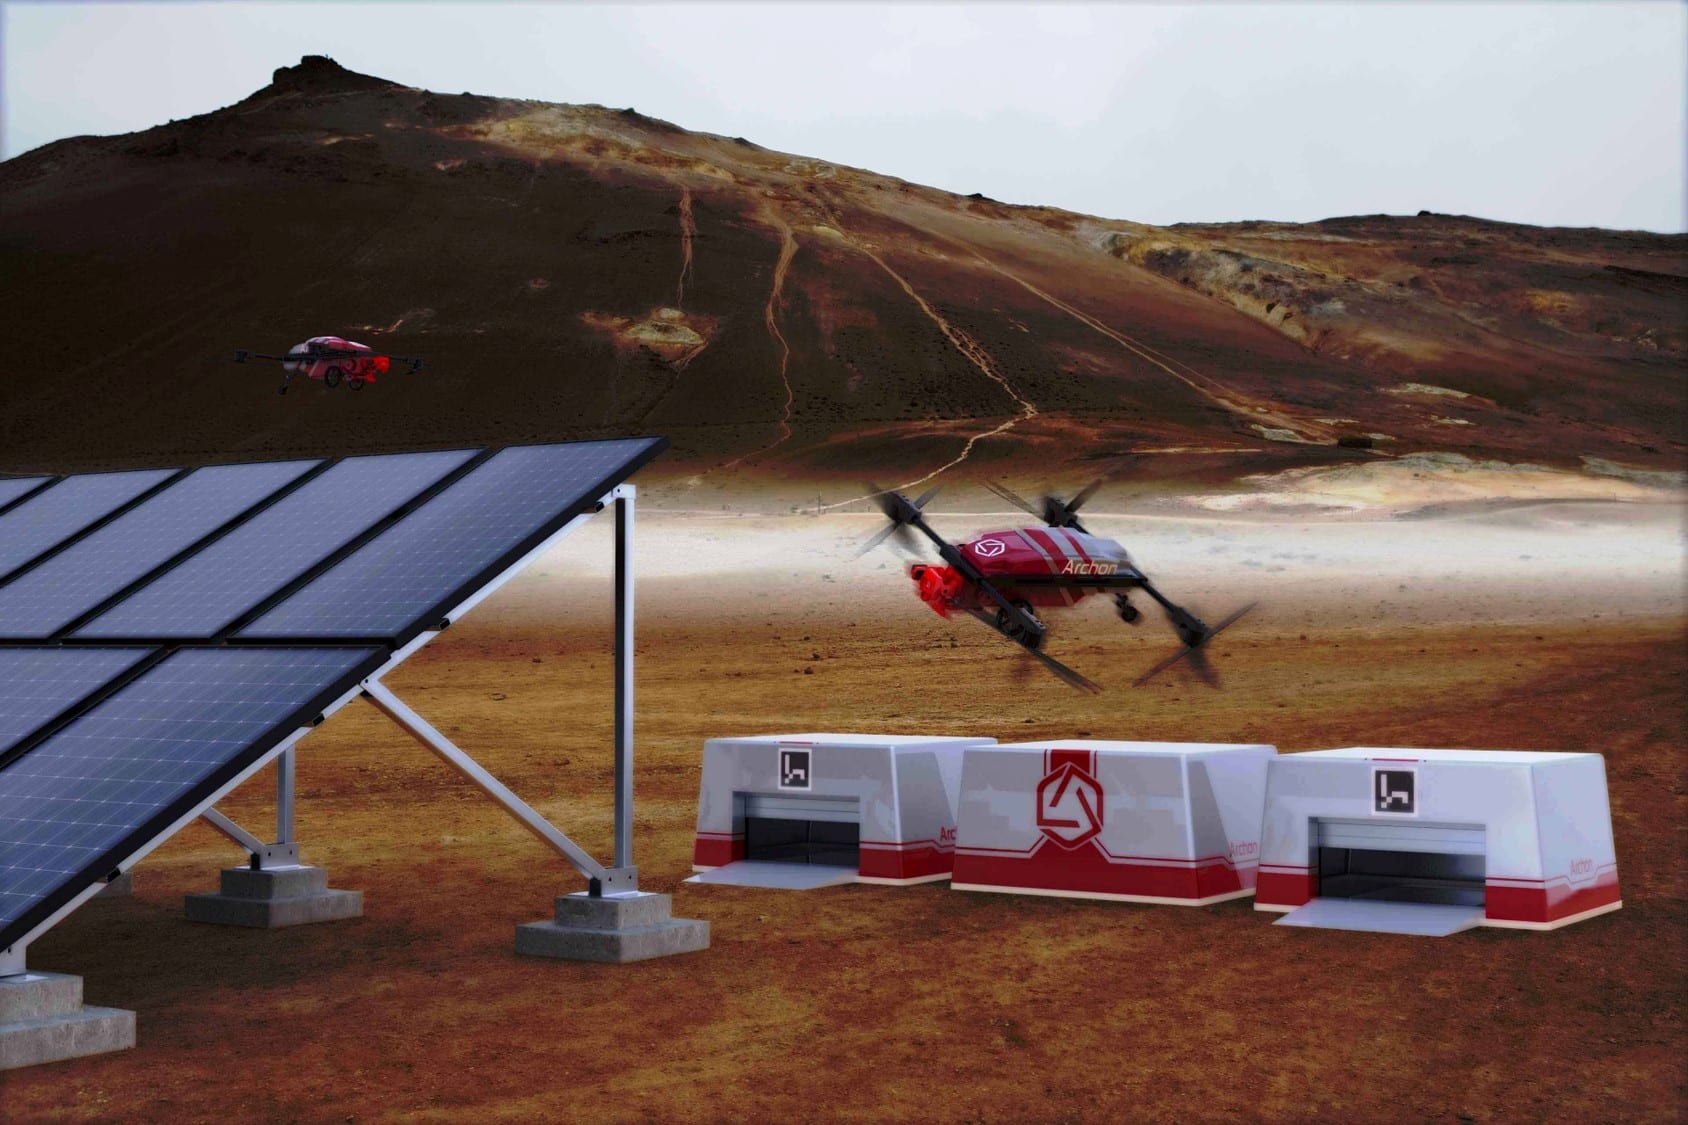 A solar drone developed by Archon